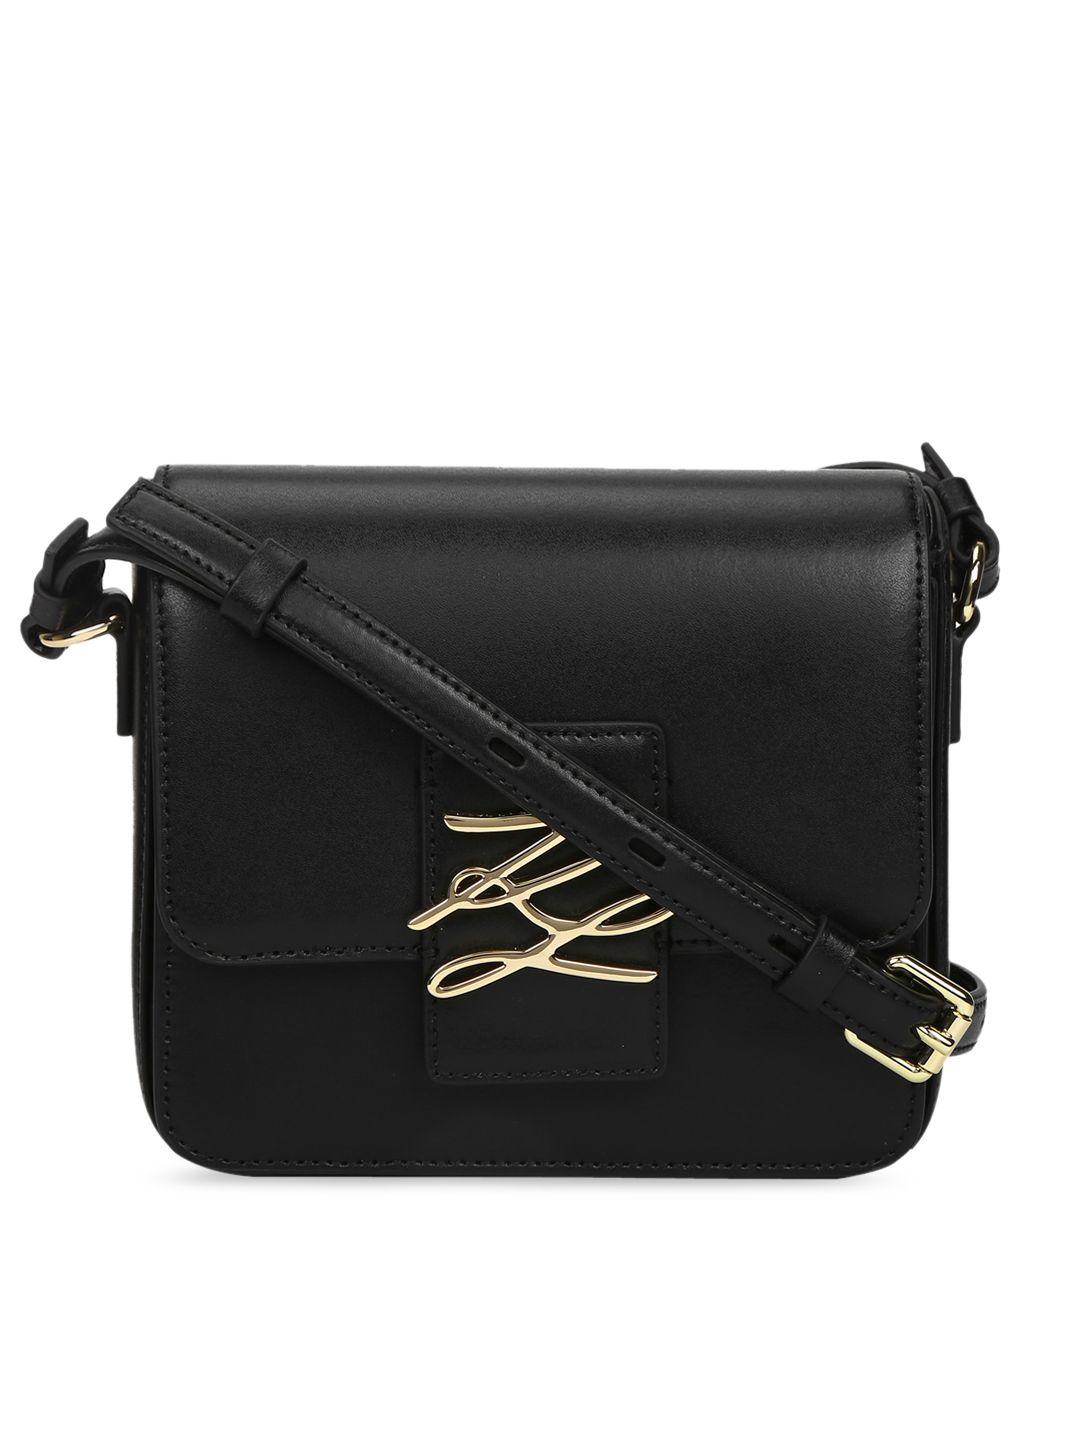 karl lagerfeld black leather structured sling bag with applique